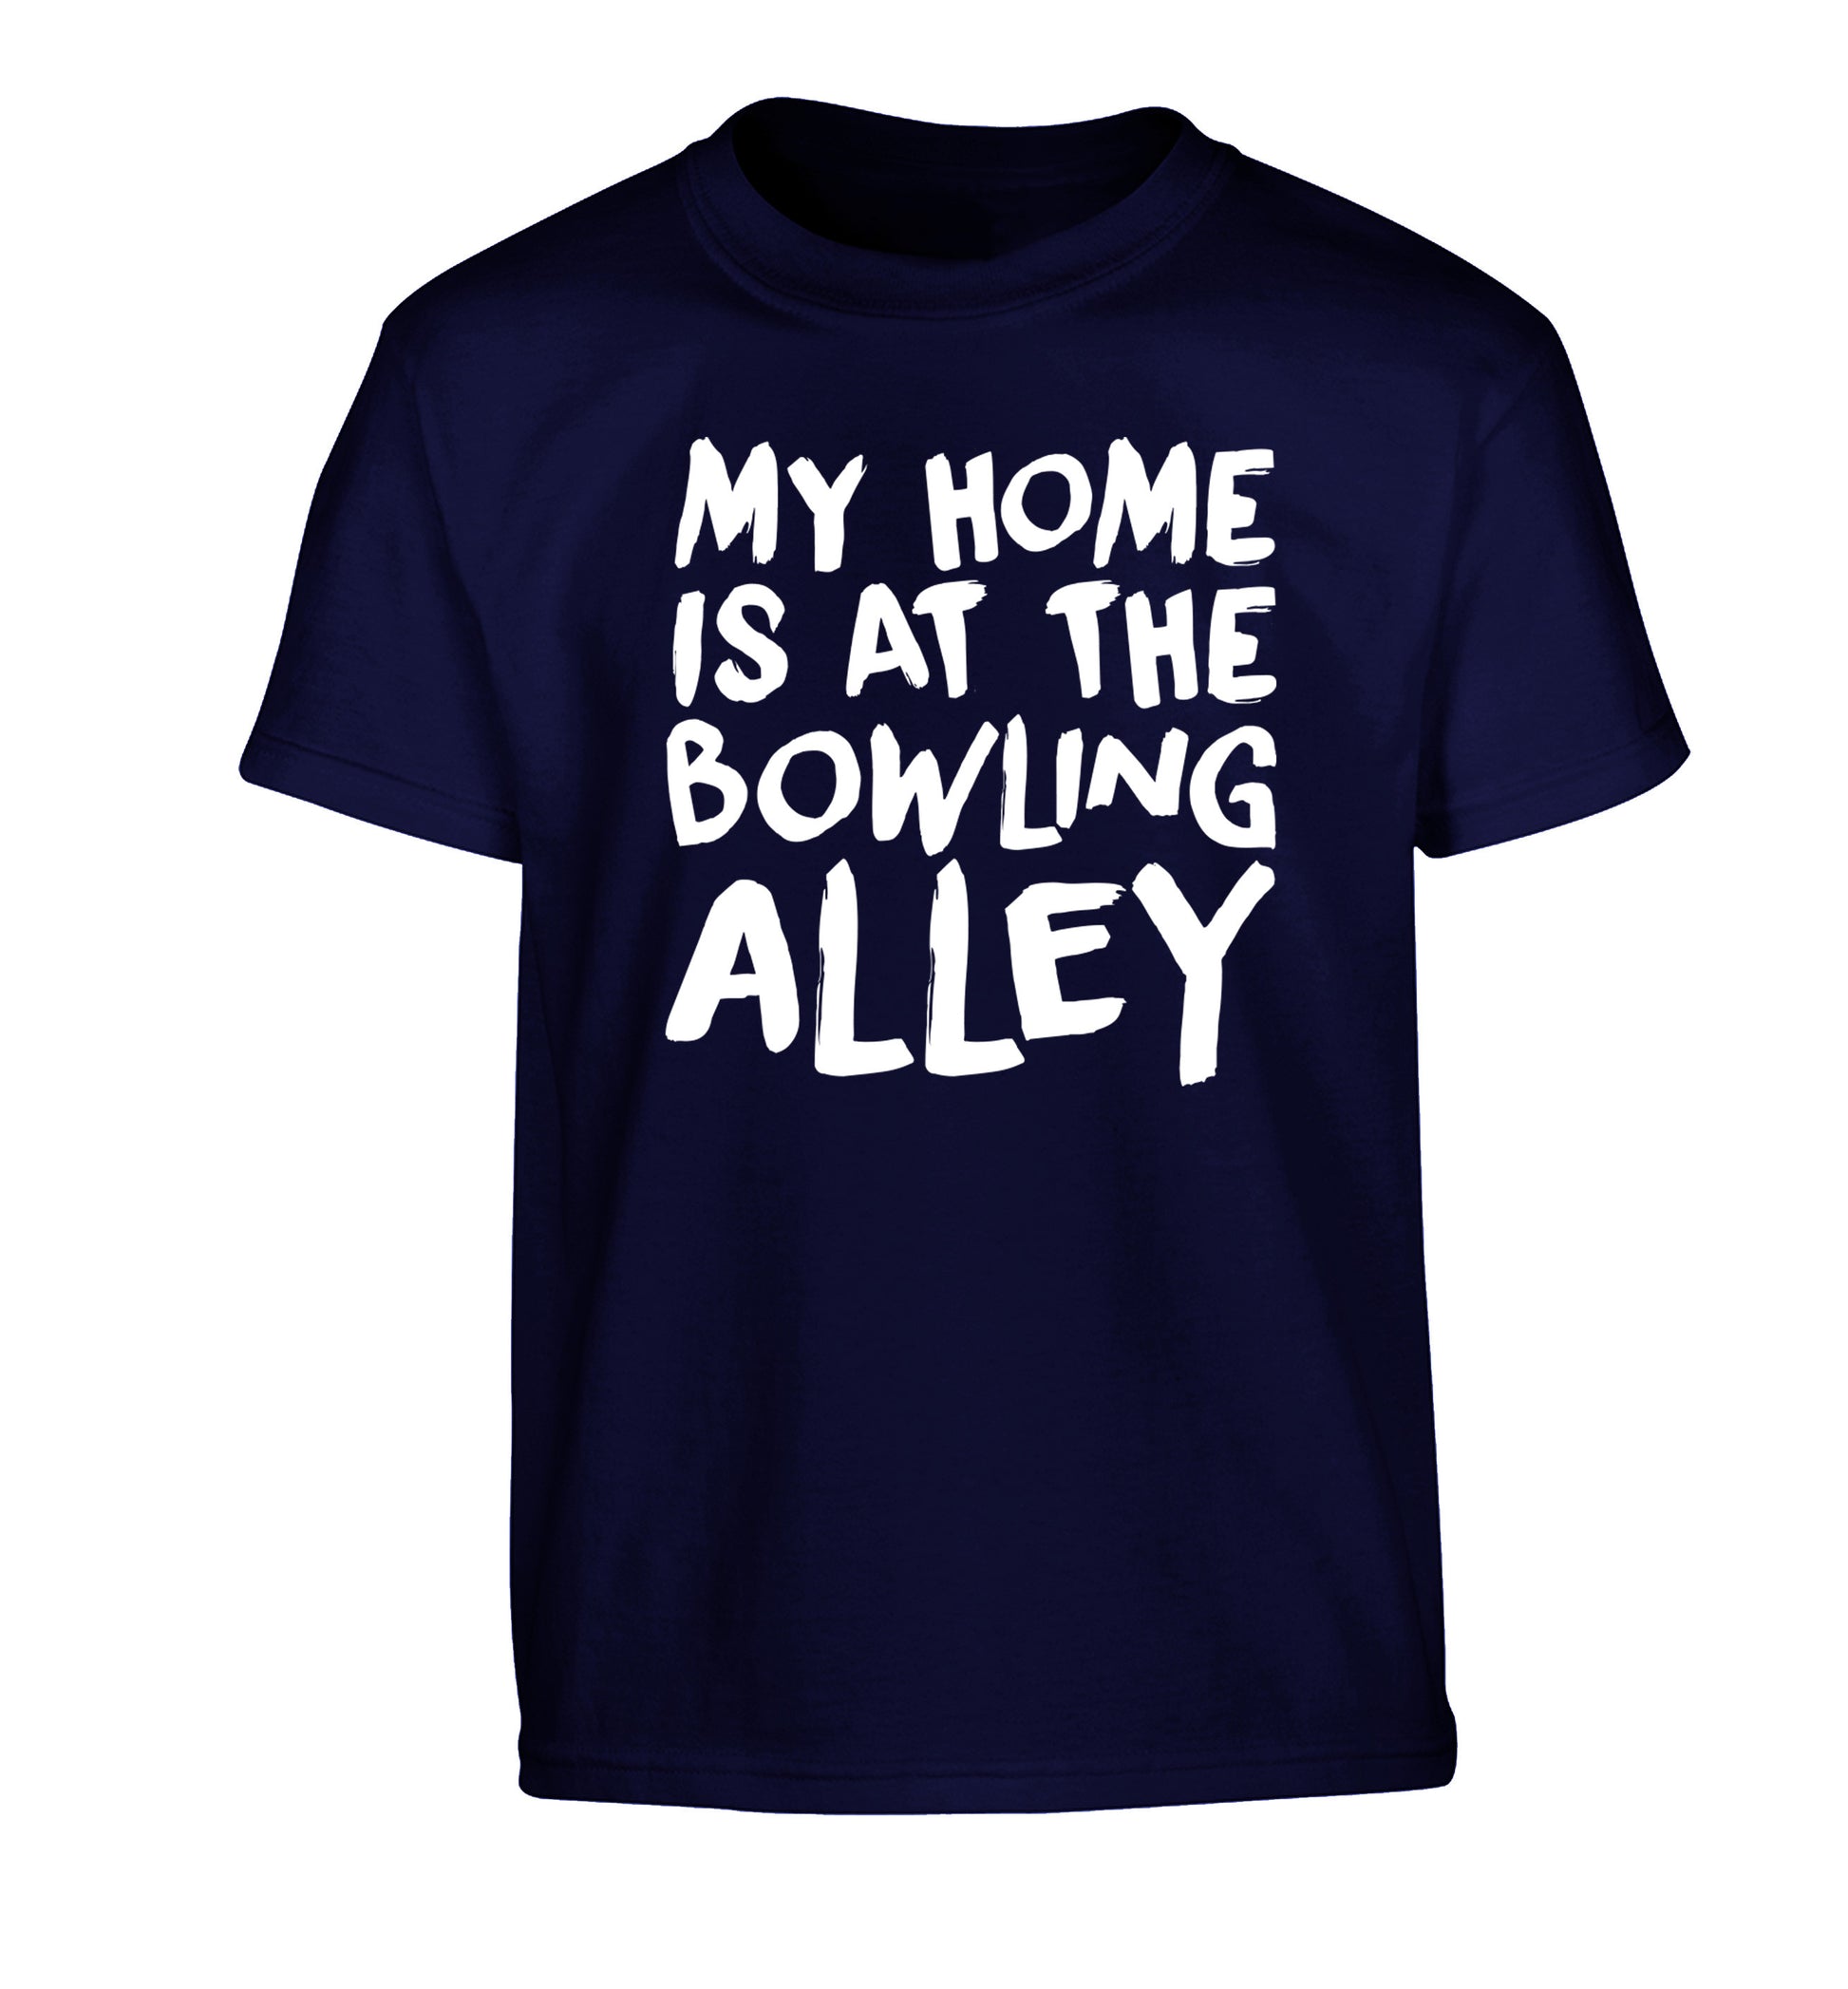 My home is at the bowling alley Children's navy Tshirt 12-14 Years